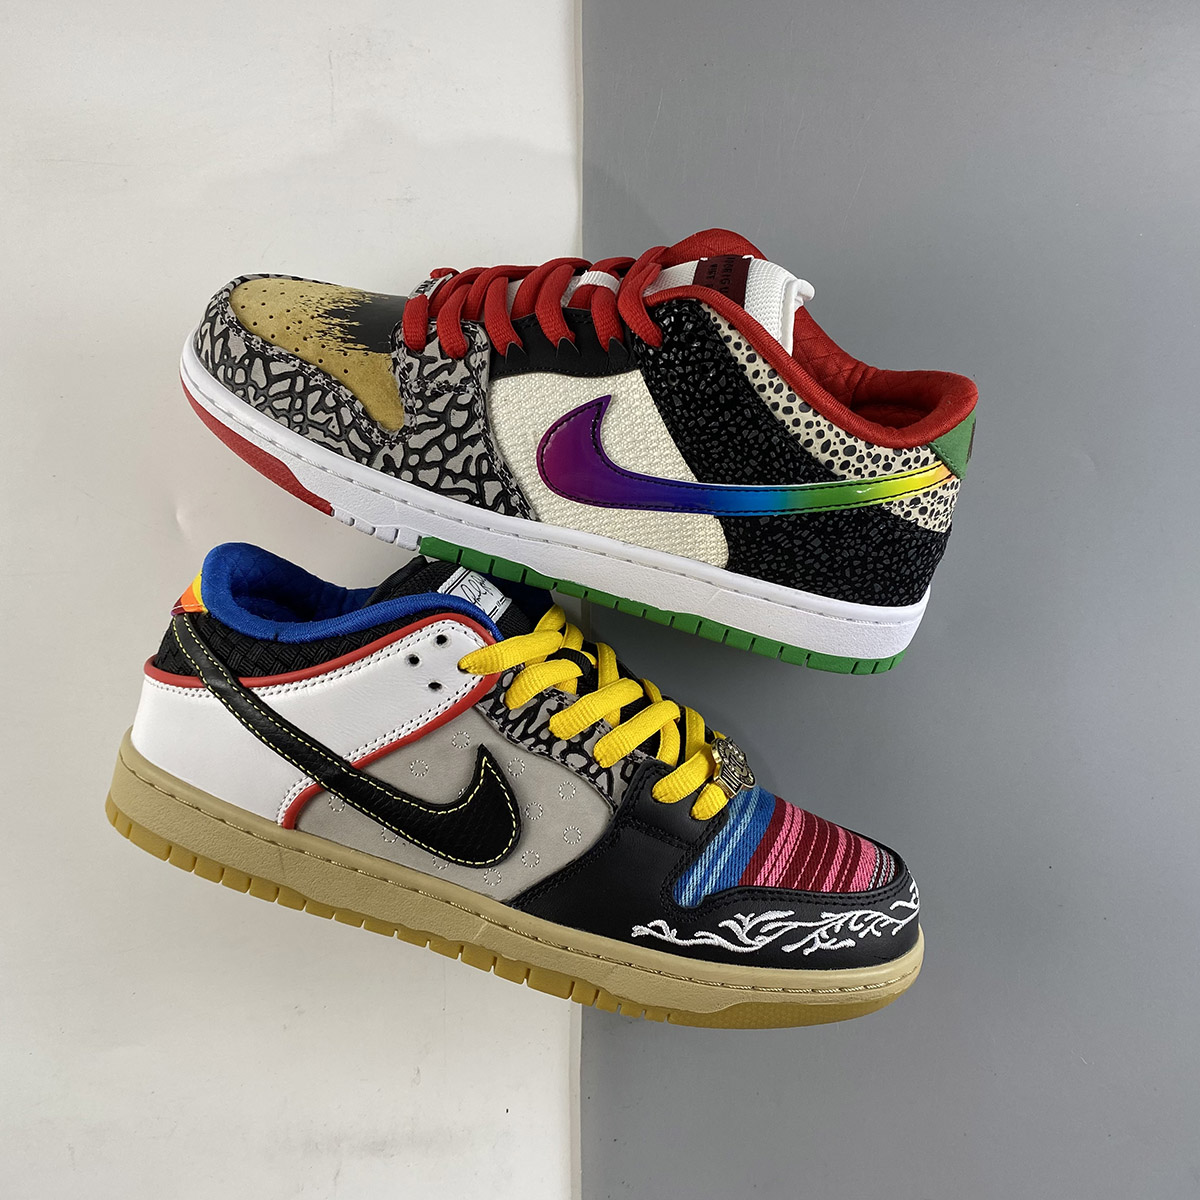 Nike SB Dunk “What The P-Rod” CZ2239-600 For Sale – The Sole Line